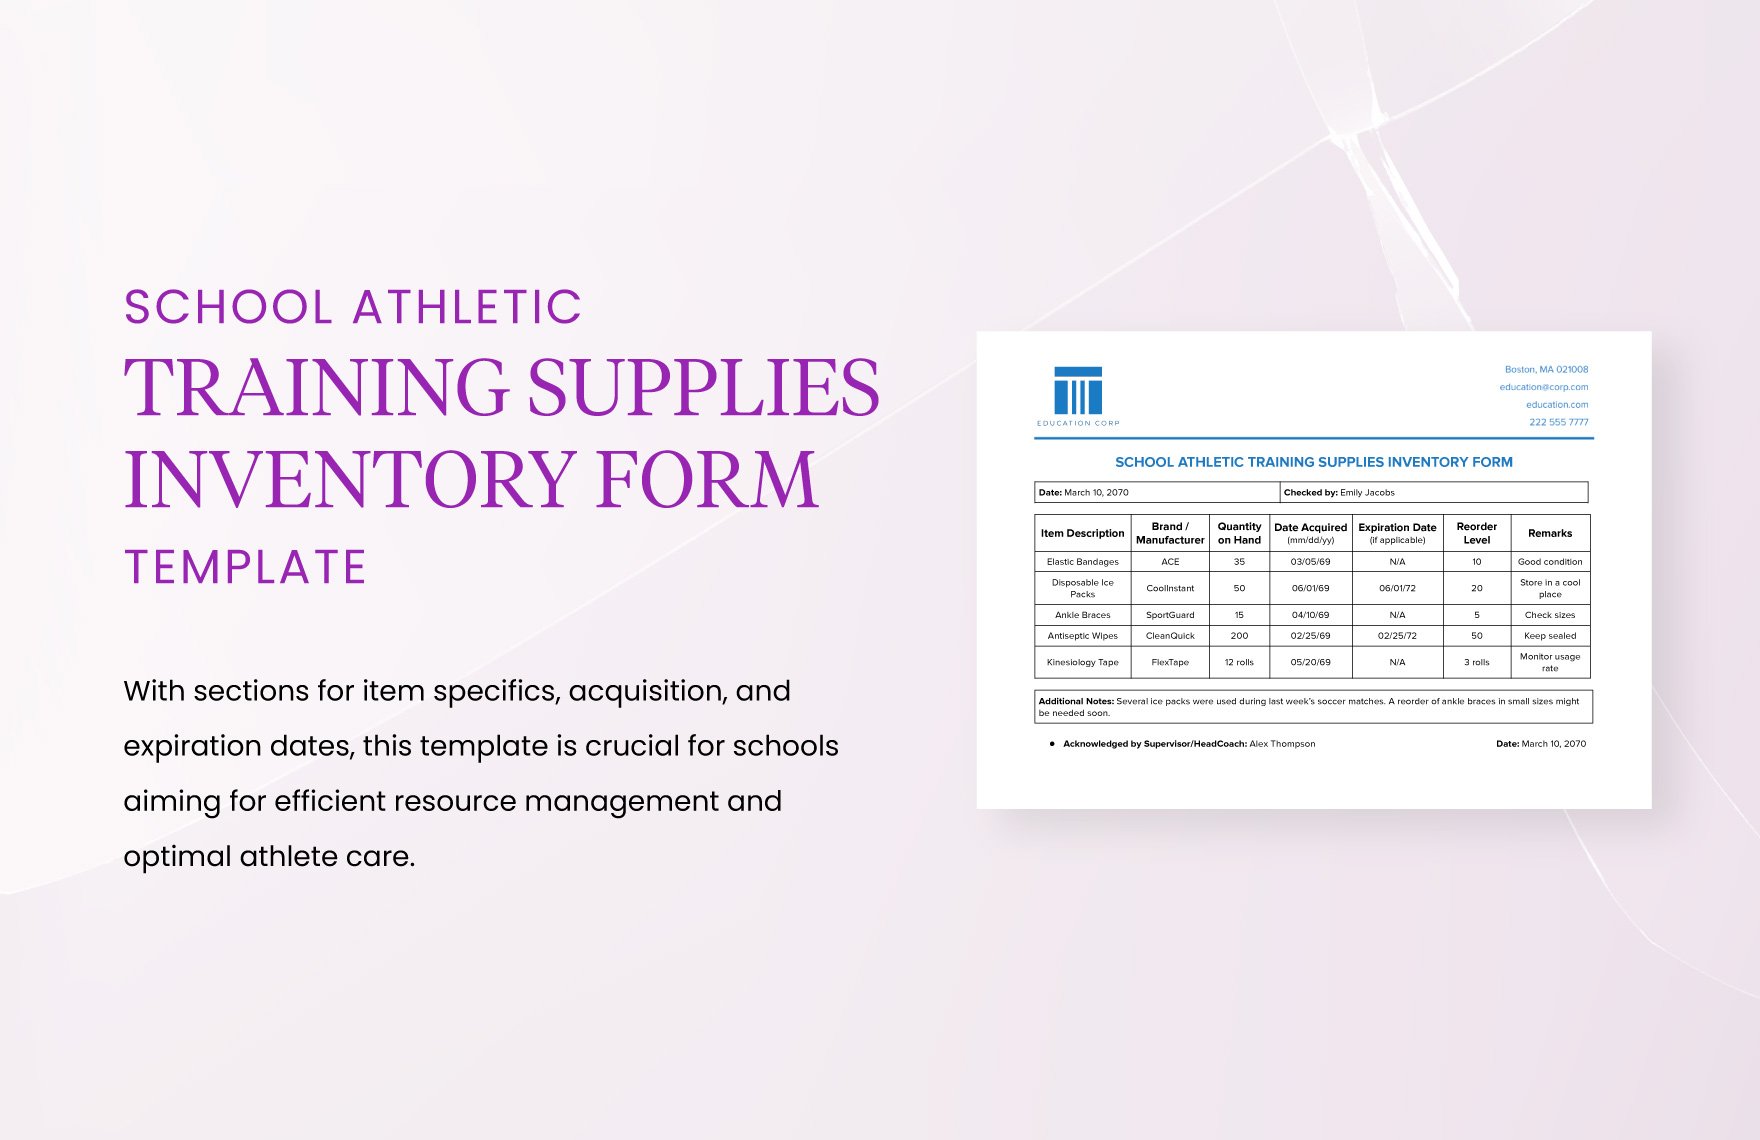 School Athletic Training Supplies Inventory Form Template